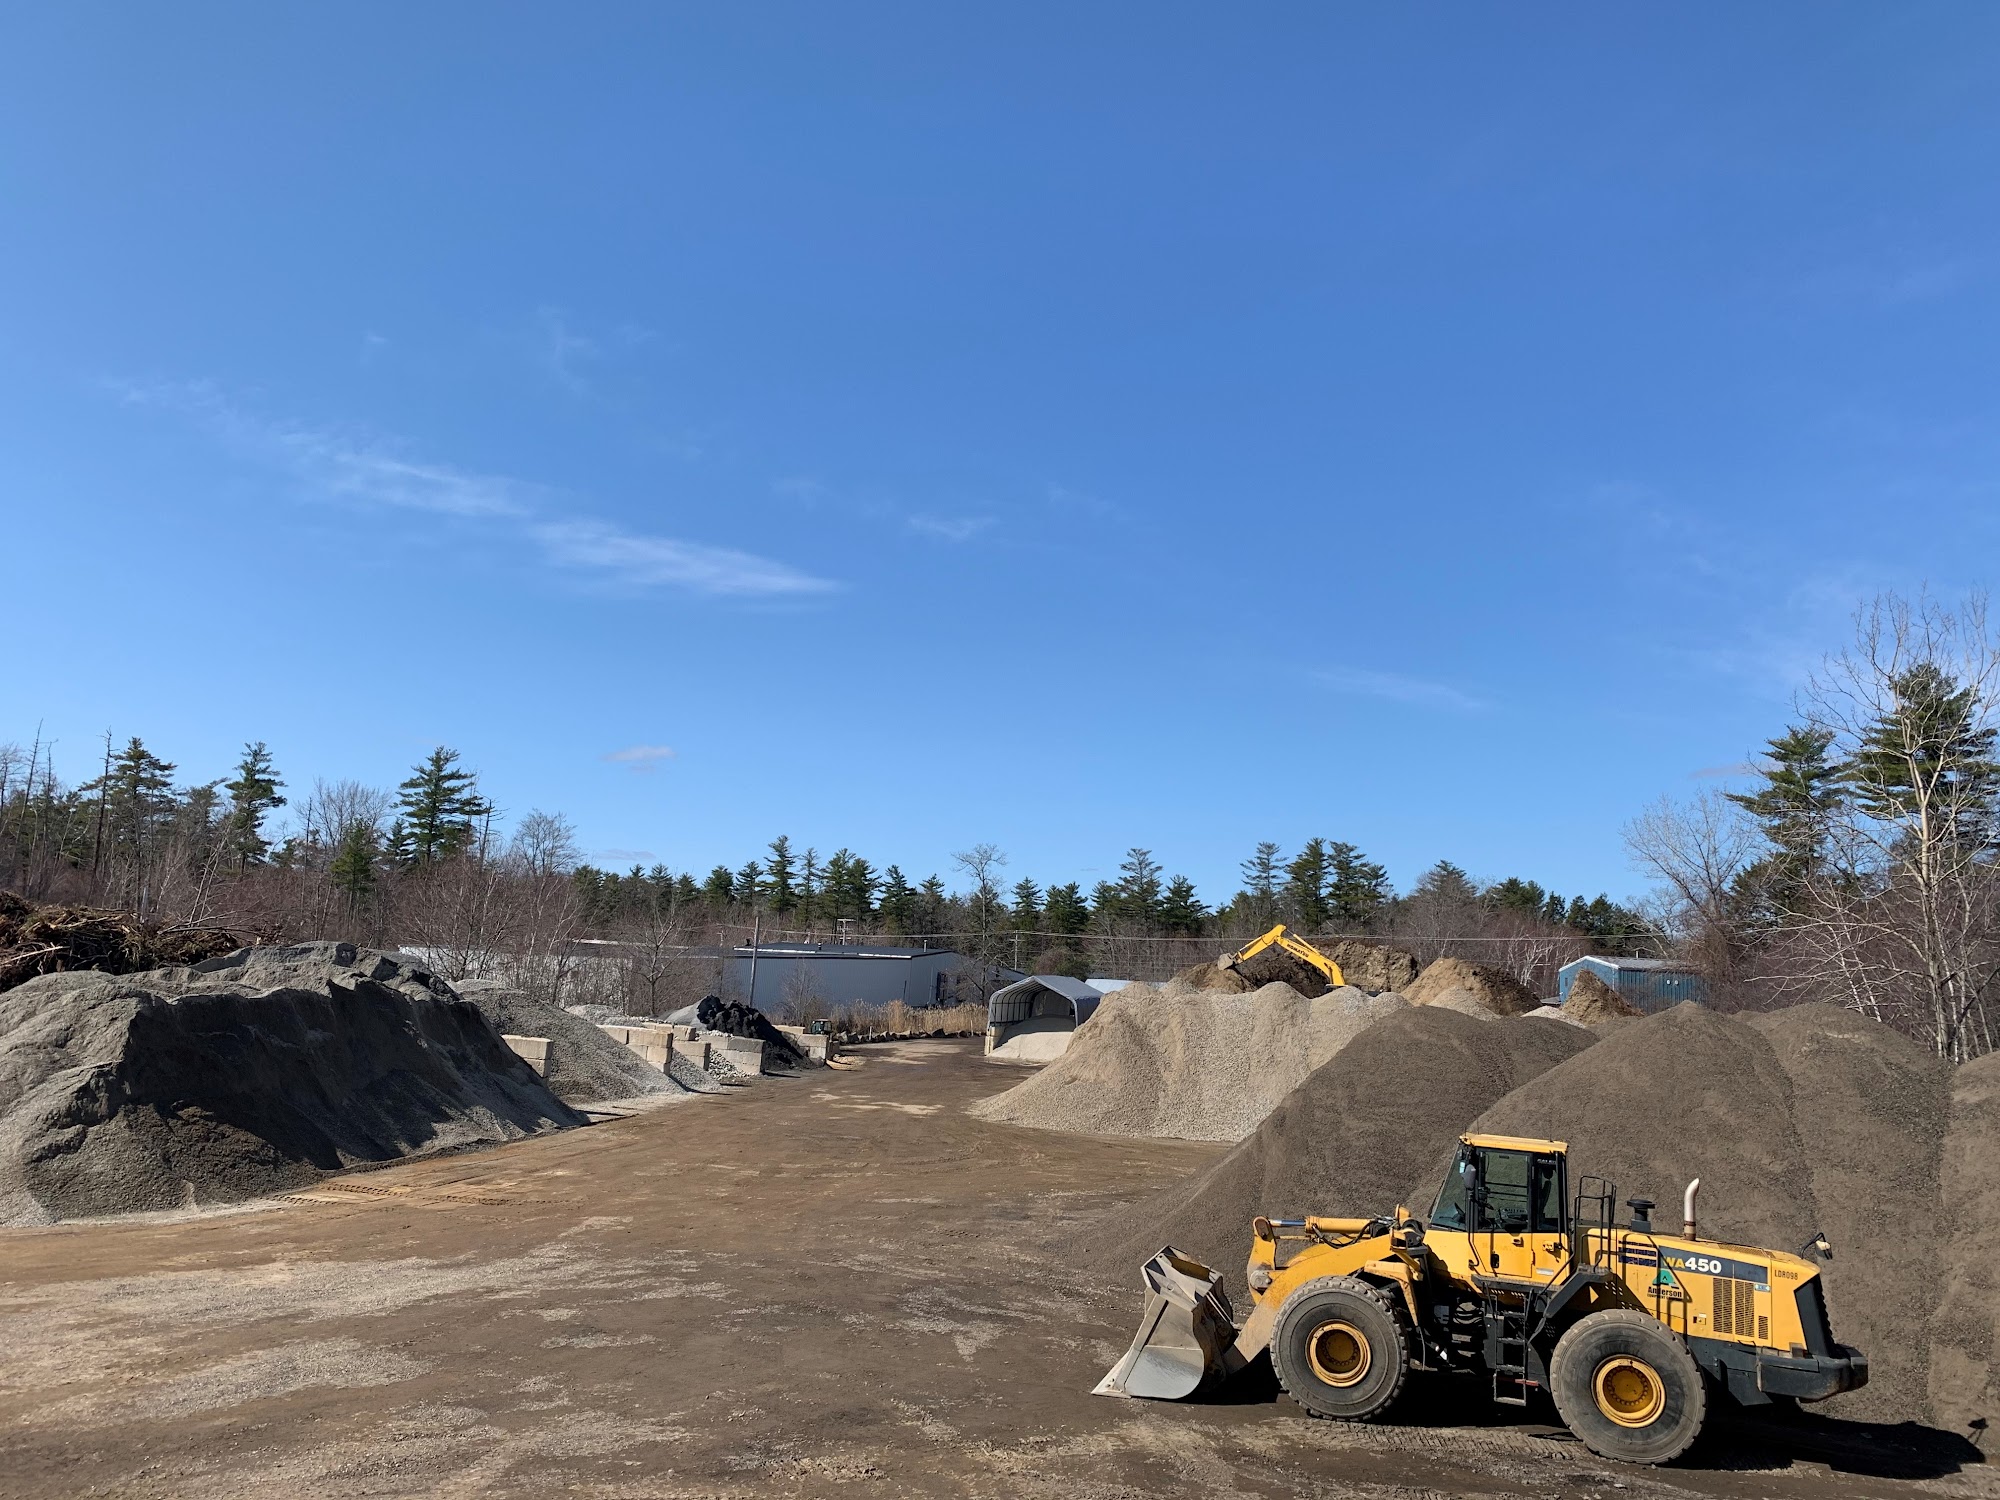 Syvinski Excavation and Earth Materials 151 Batchelder Rd, Seabrook New Hampshire 03874